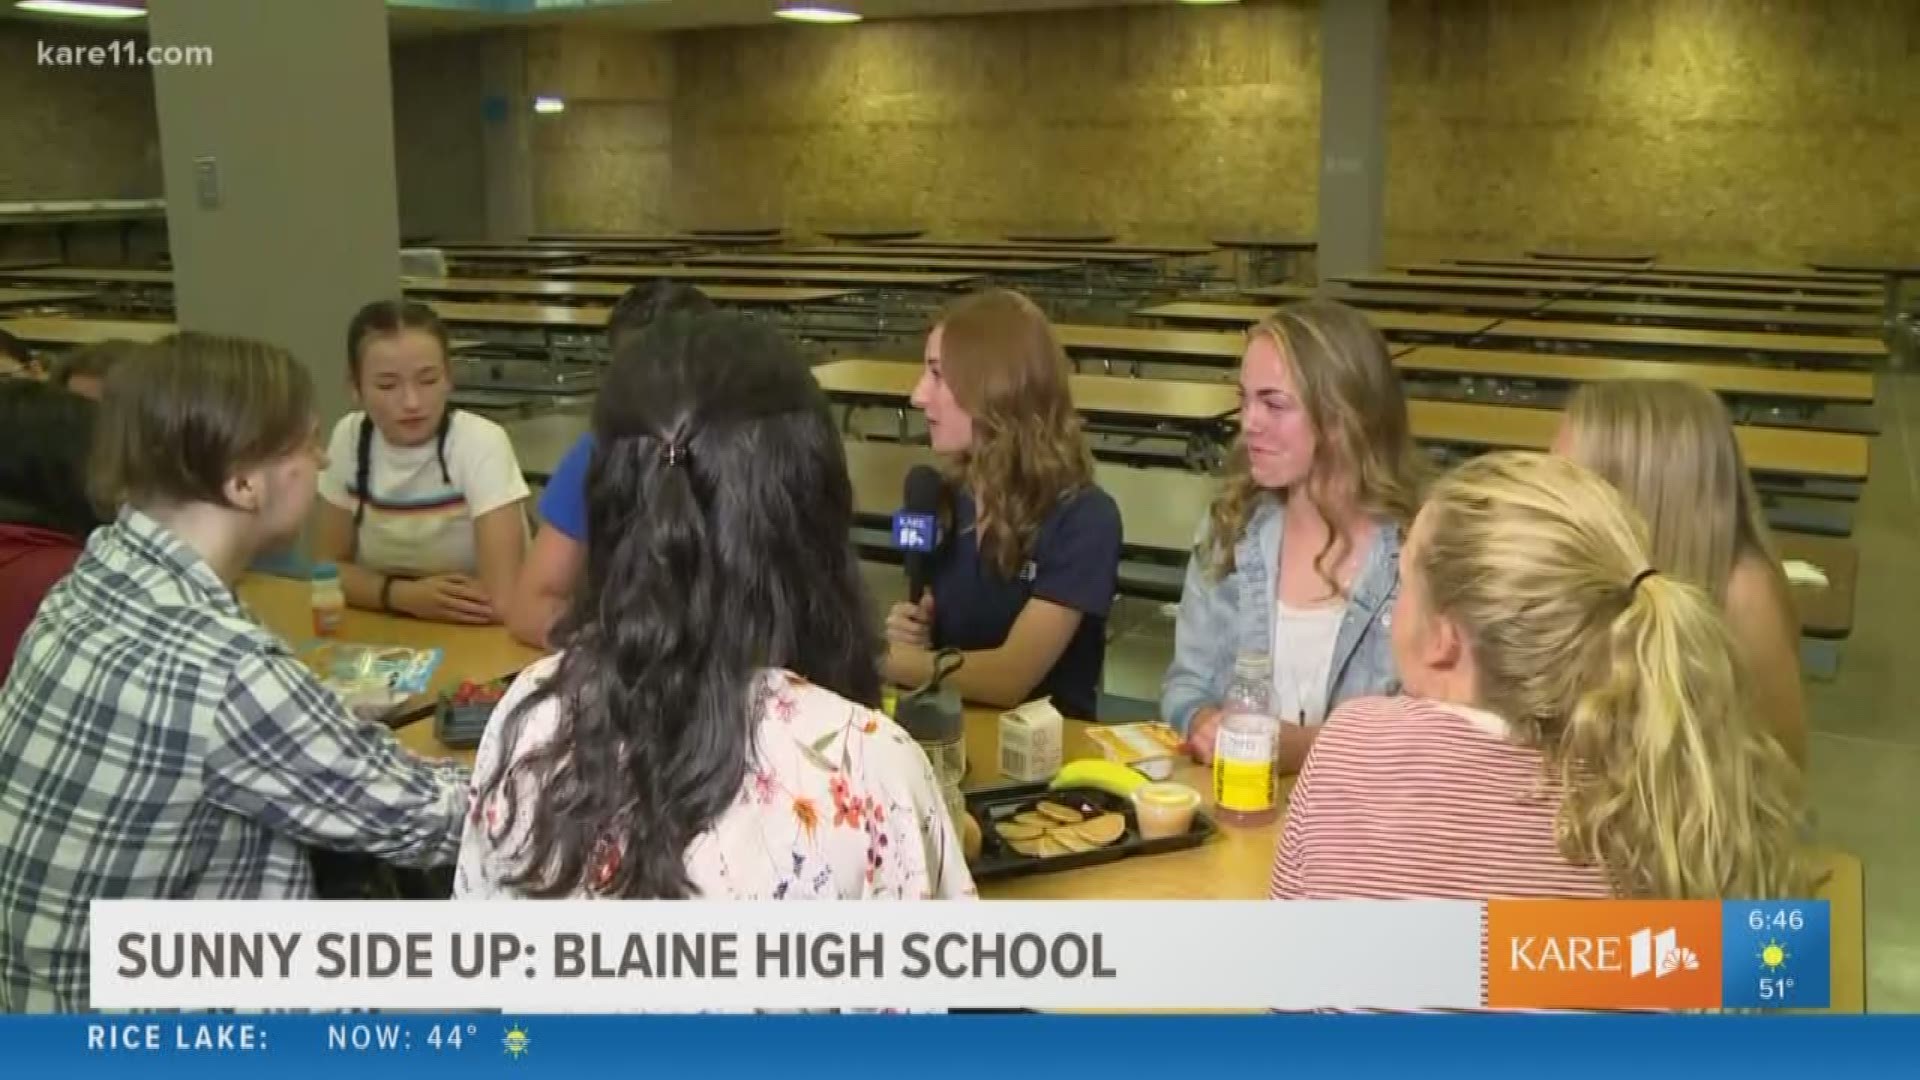 Sunny Side Up went back to school this week, heading to Blaine High School to eat breakfast with the student council!